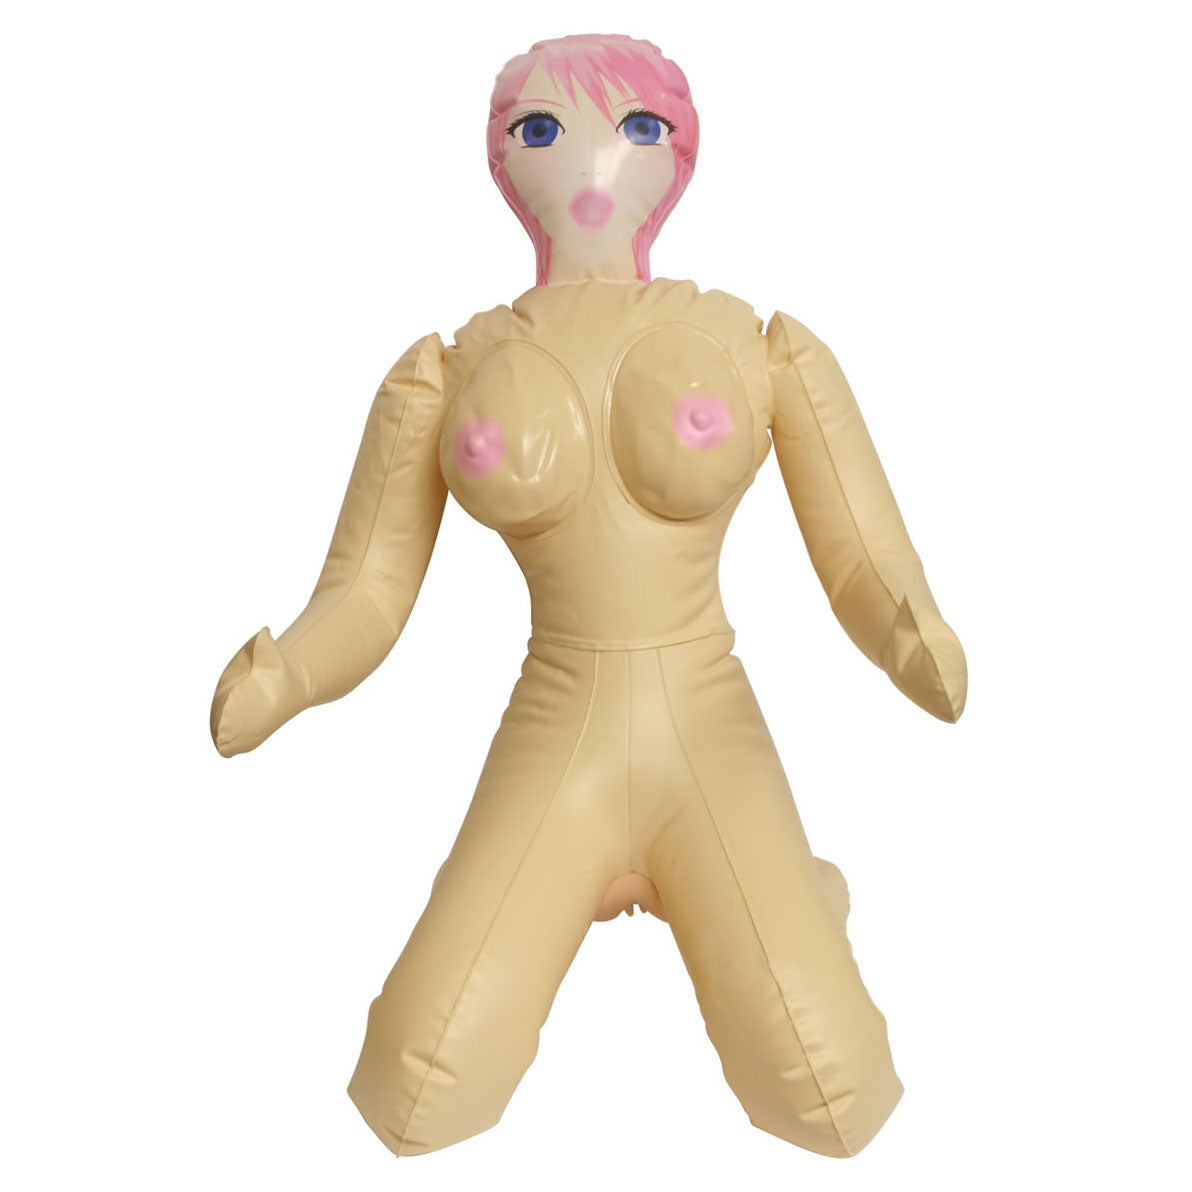 Vibrators, Sex Toy Kits and Sex Toys at Cloud9Adults - Lil Barbi Love Doll With Real Skin Vagina - Buy Sex Toys Online